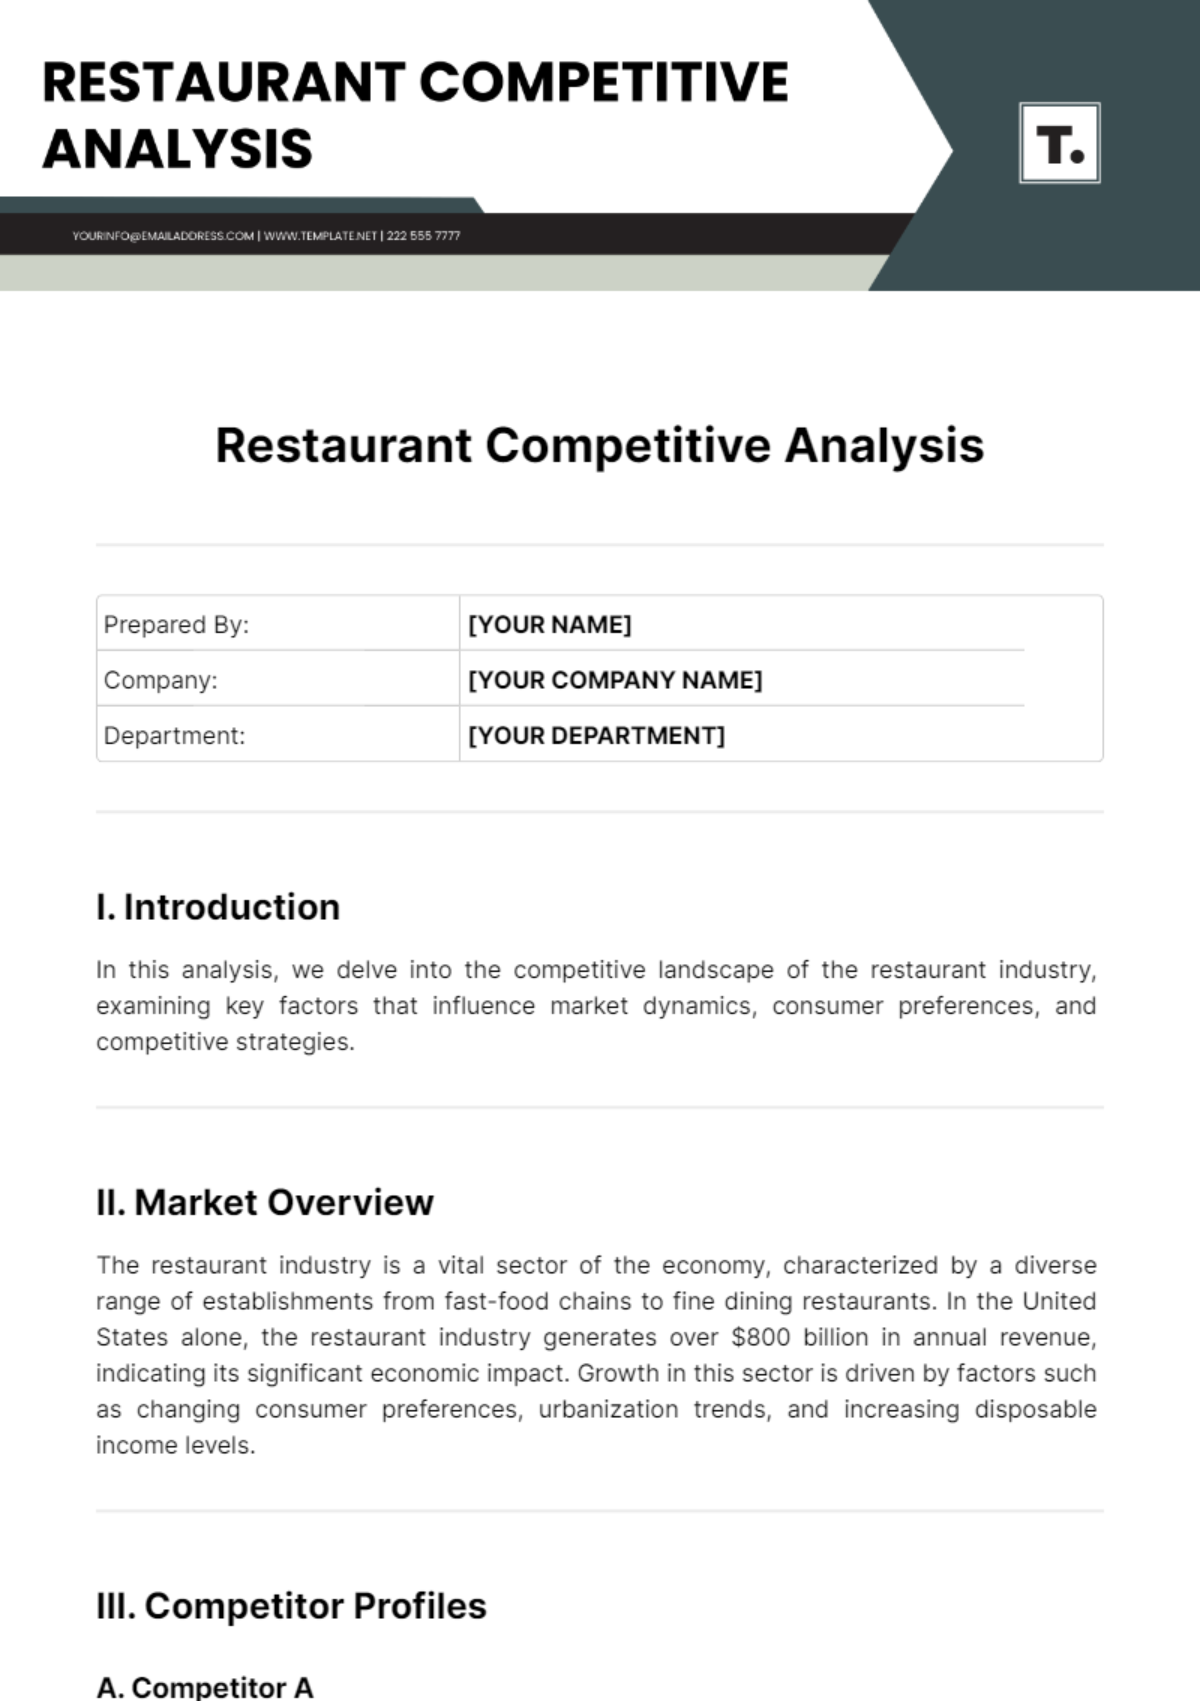 Restaurant Competitive Analysis Template